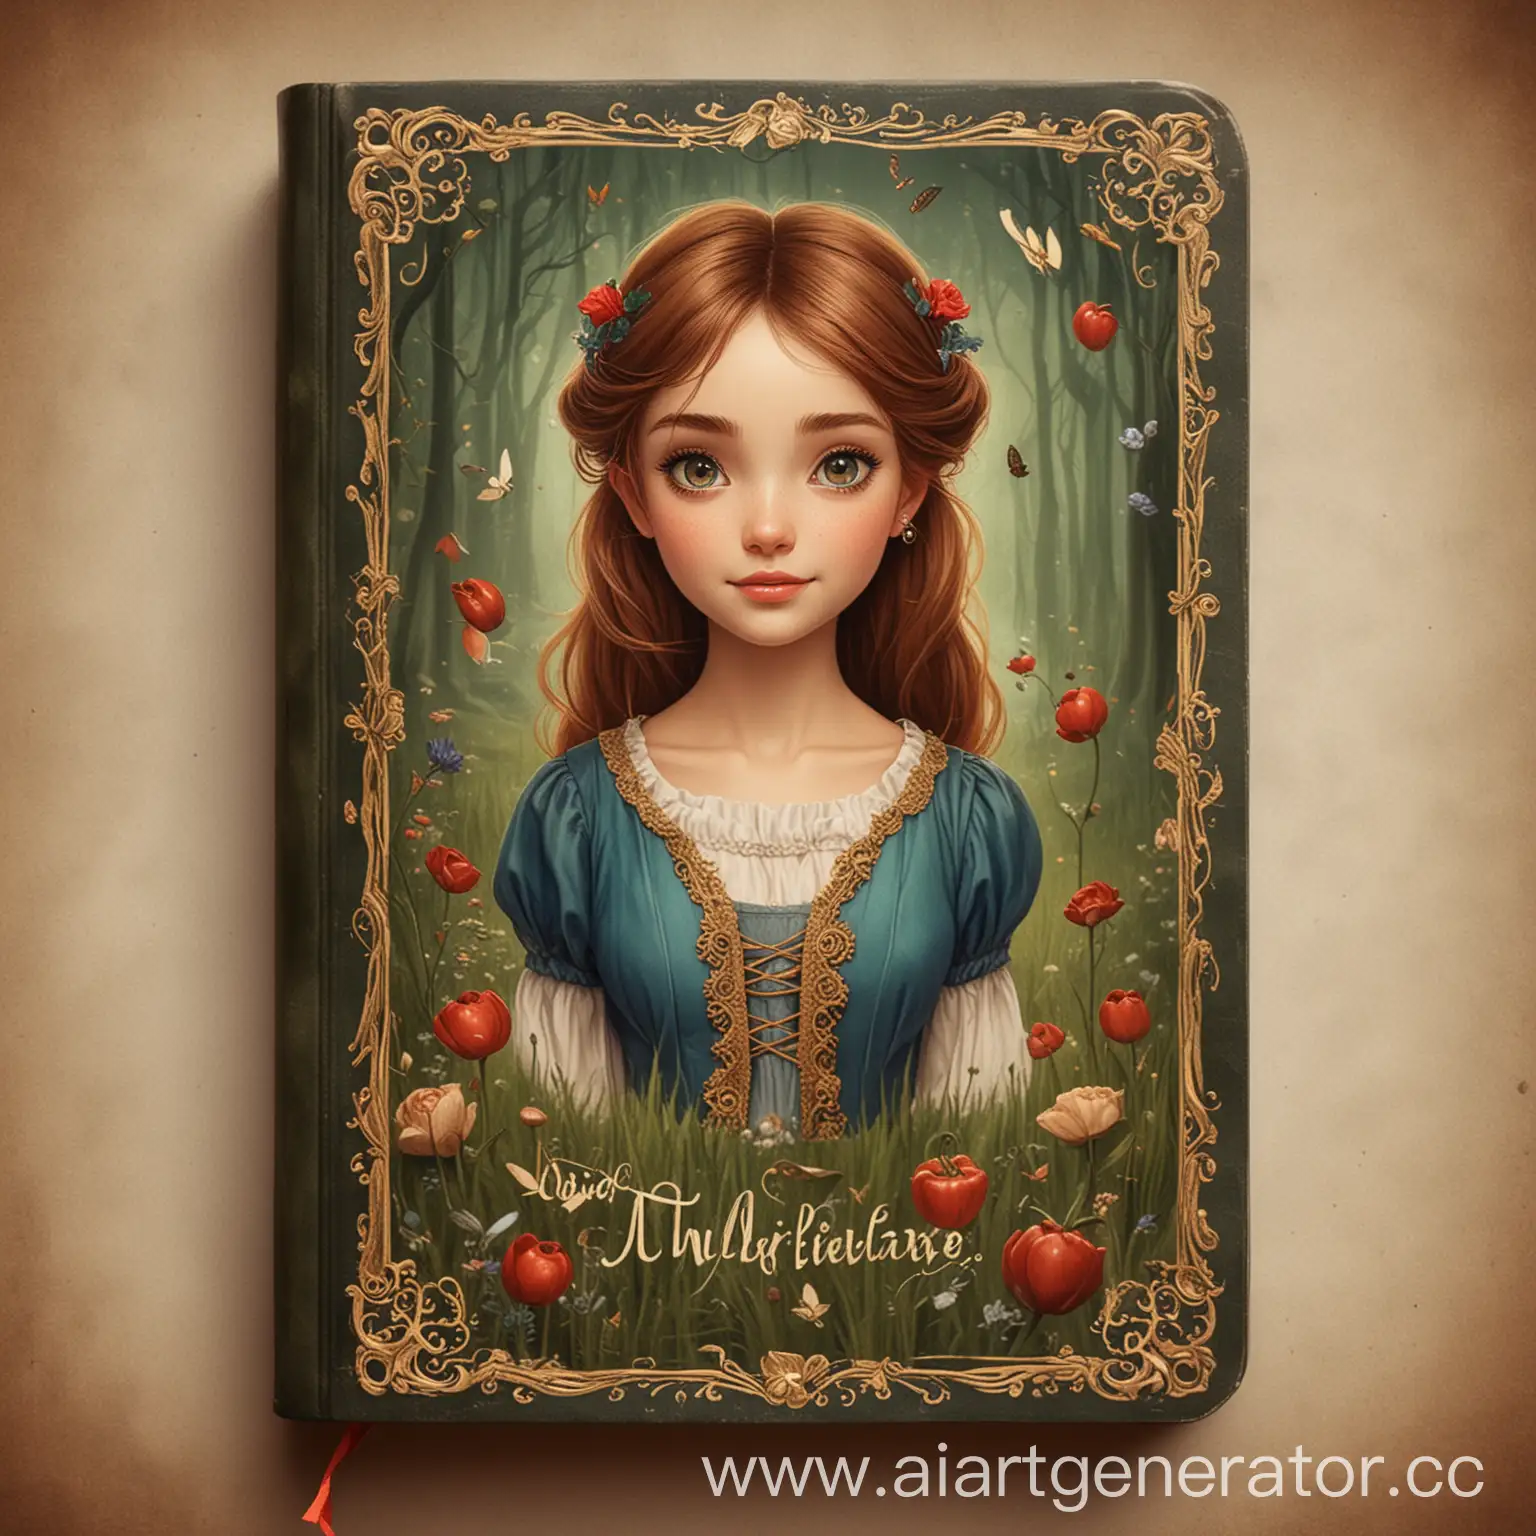 Fairy-Tale-Characters-Illustrated-for-Readers-Diary-Cover-on-Pinterest